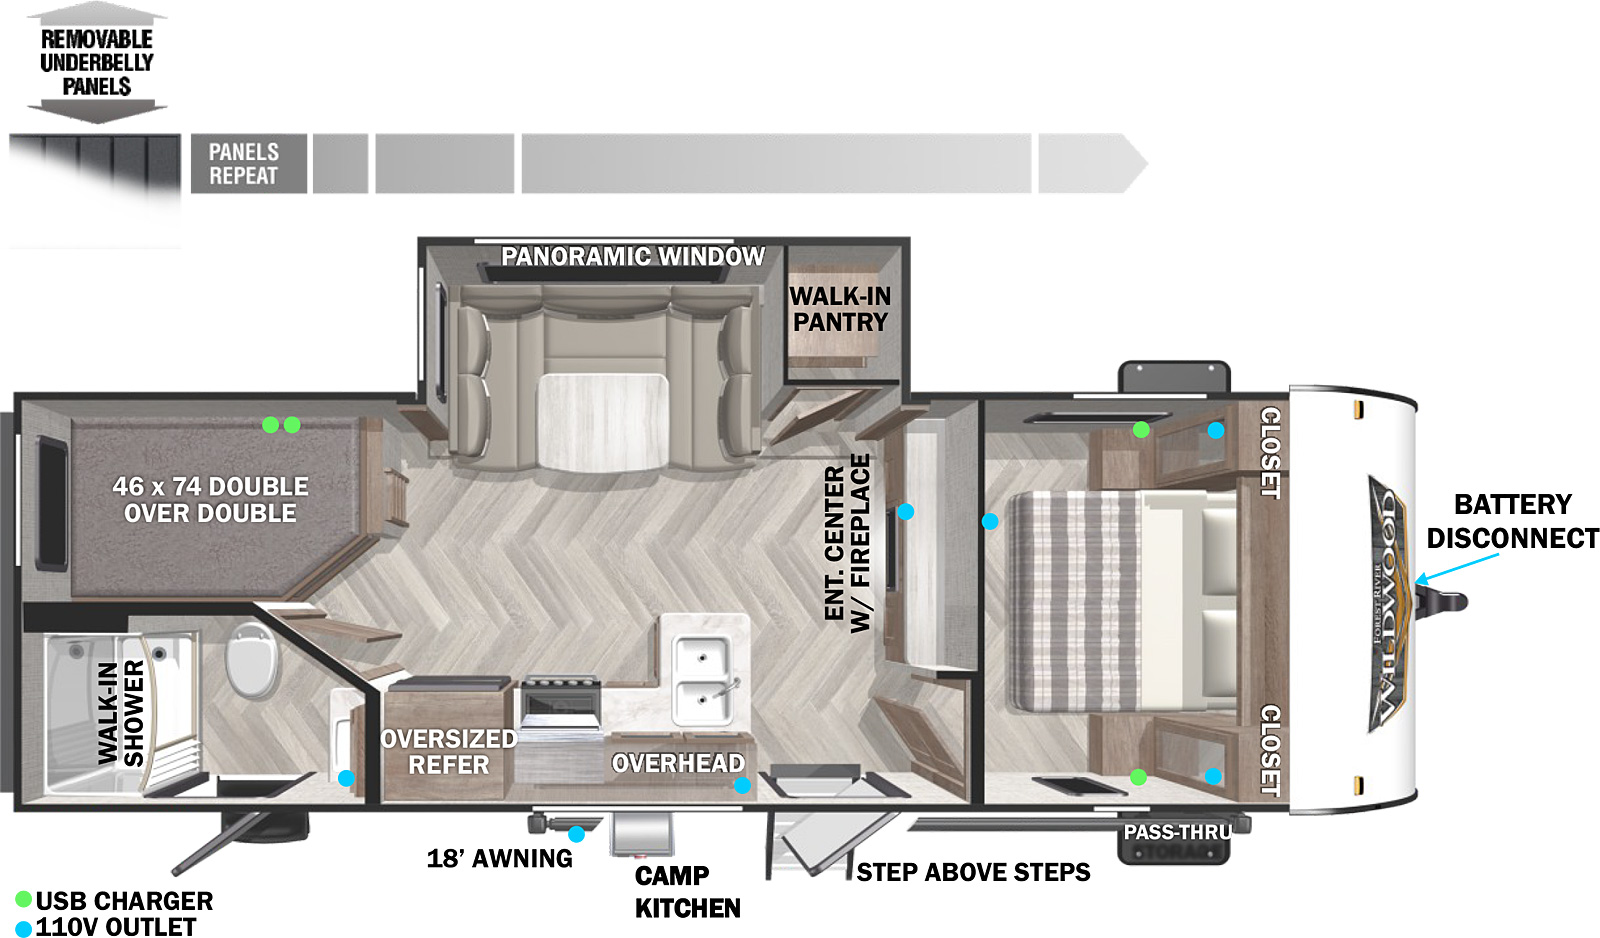 The 240BHXL is a single slide out floorplan with a private bedroom and double over double bunks. The outside features an 18 foot electric power awning. To the right of the entry is the private bedroom bed with underbed storage and closets on each side. These closets come prepped with CPAP storage possibility. In the middle of the unit, there is the entertainment center featuring an electric fireplace. This also features a soundbar and an area to mount a TV. In the slide out there is a U-dinette and a pantry beside it. Across from the slide out is the kitchen with a refrigerator, oven, microwave, sink, and cabinet storage. In the back is the 46 x 74 double over double bunks and a bathroom with a shower, toilet, sink, linen storage, and second entry.